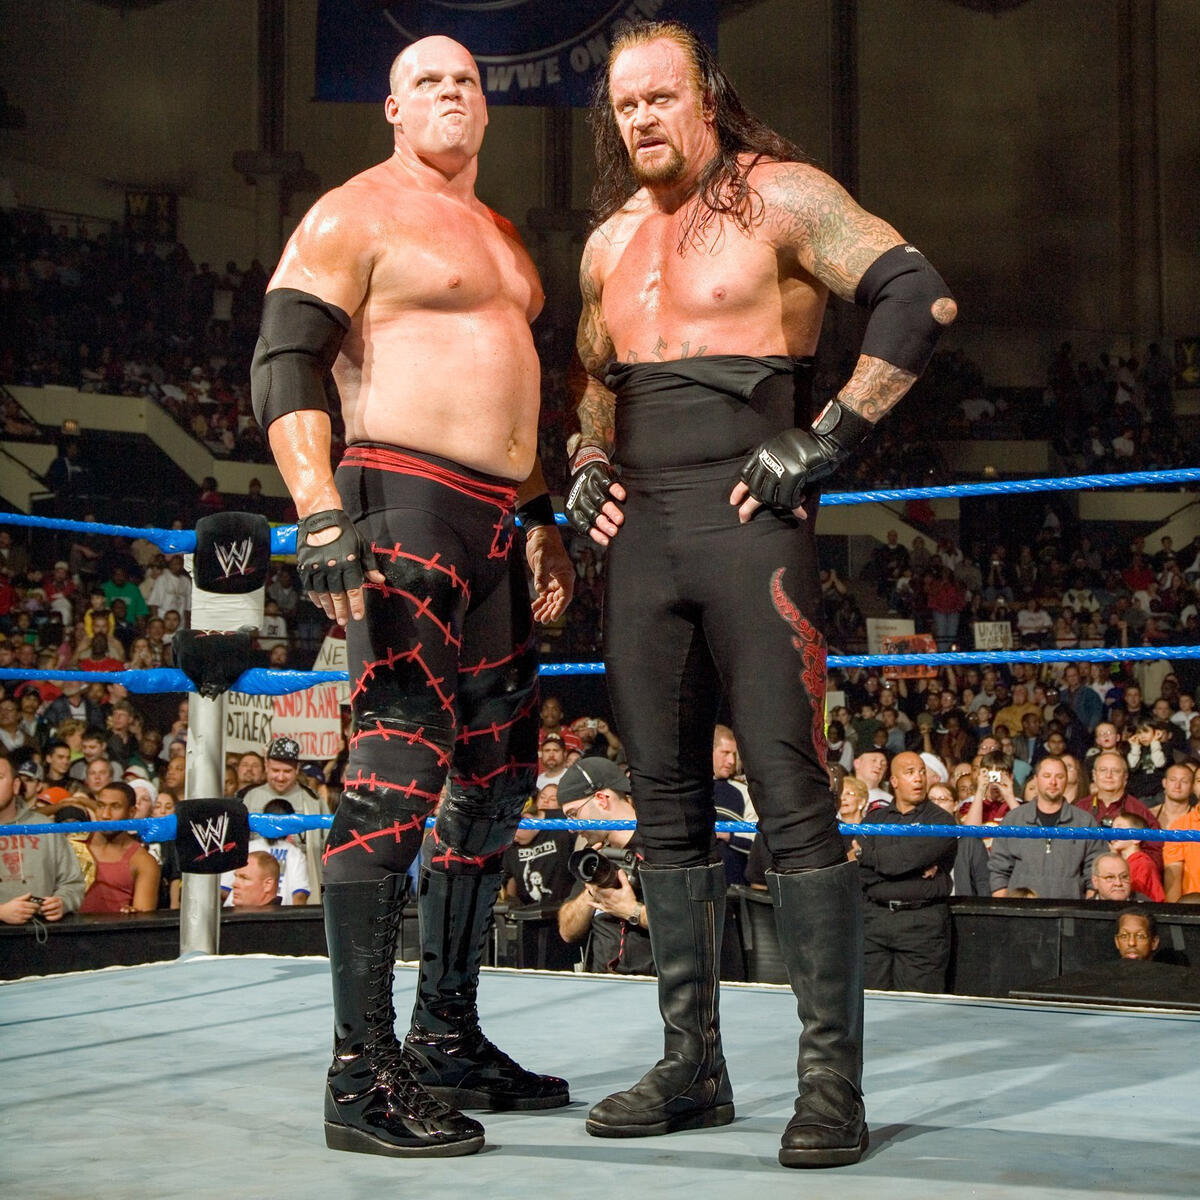 Awesome photos of The Brothers of Destruction